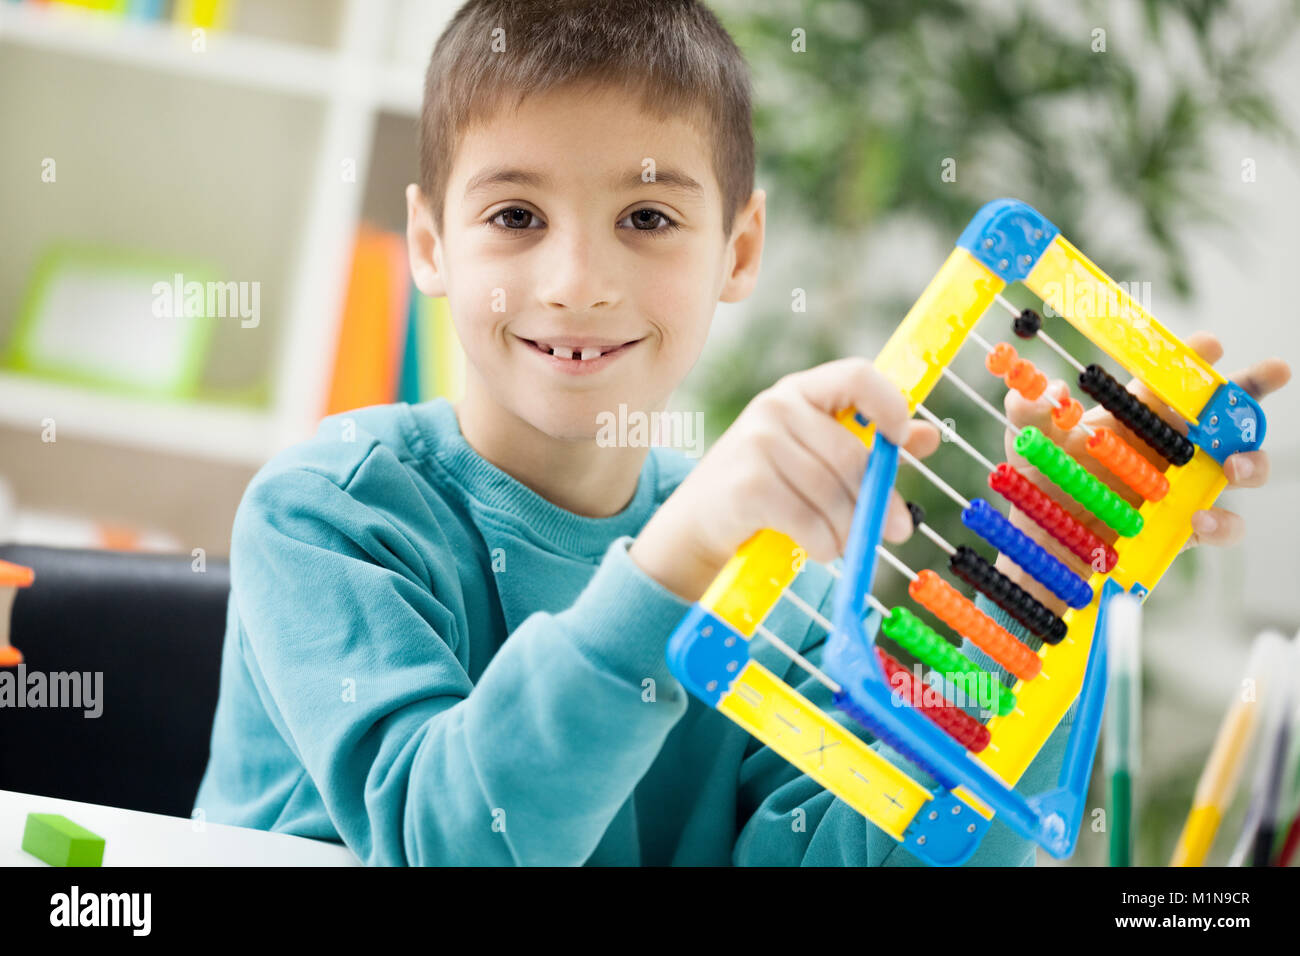 smiling young boy at home learning Stock Photo